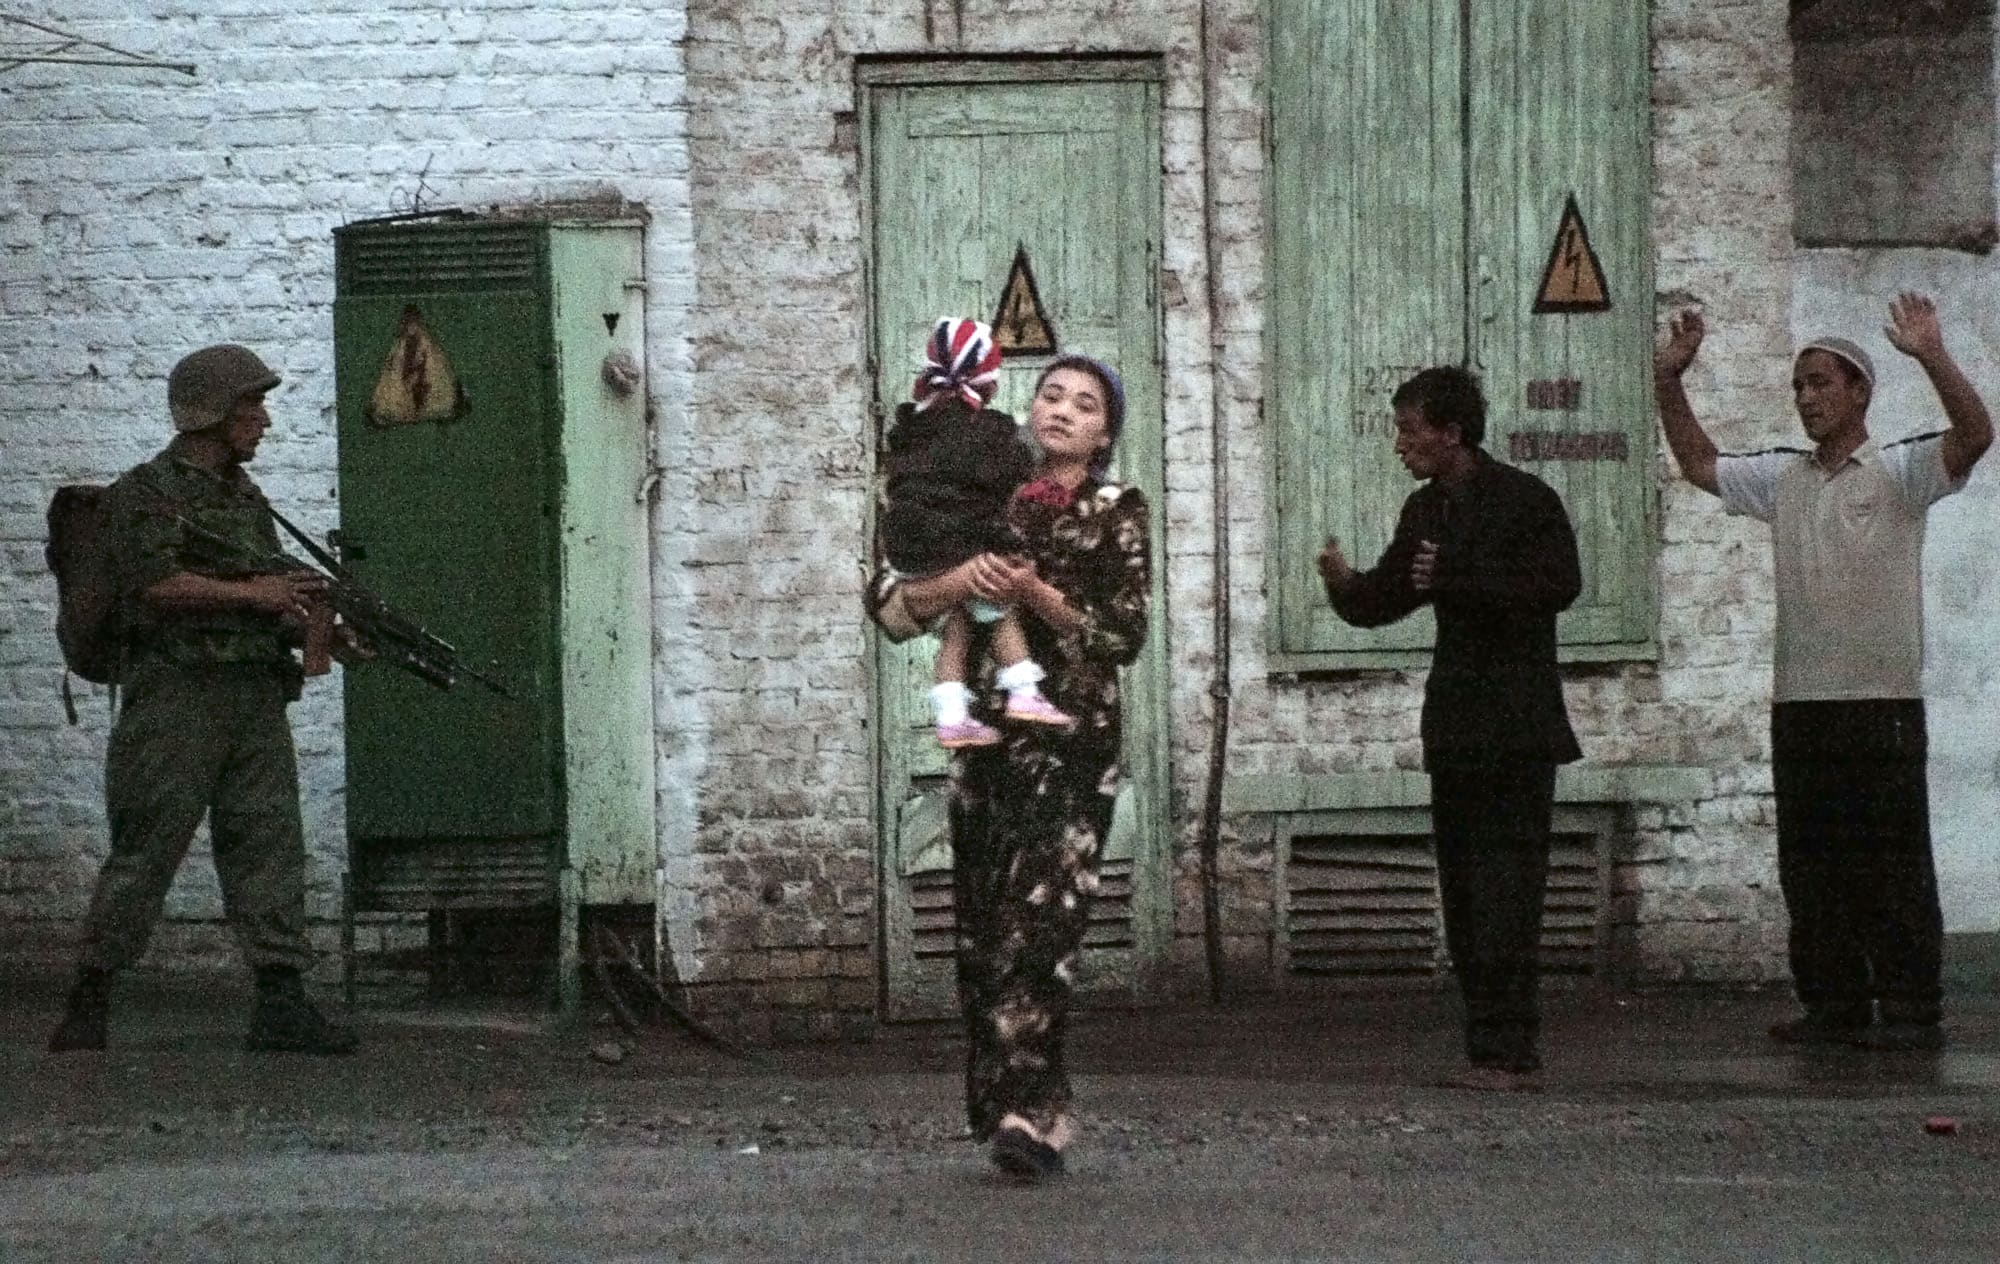 In this 13 May 2005 file photo, a local resident carrying a child, walks by a soldier during the uprising in the city of Andijan, Uzbekistan, AP Photo/ Efrem Lukatsky, File